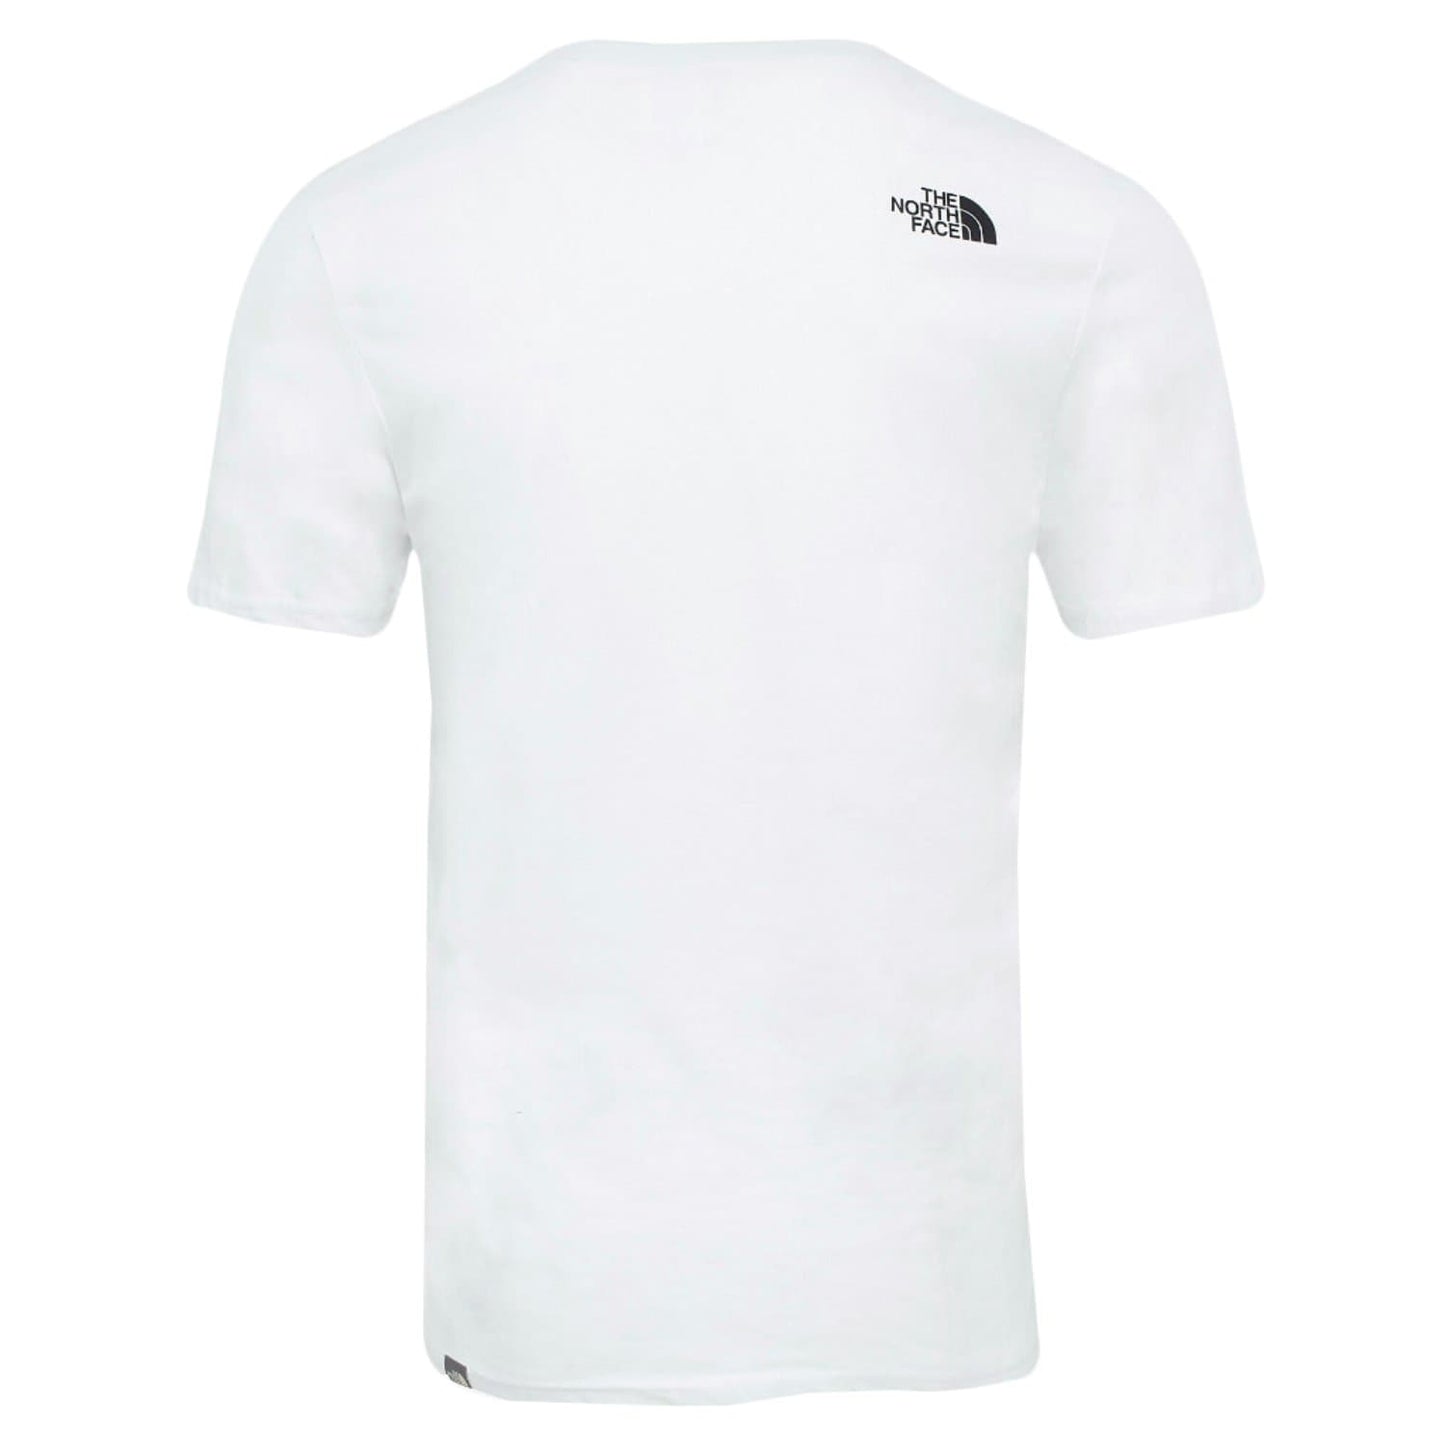 The North Face Easy T-Shirt White/Black